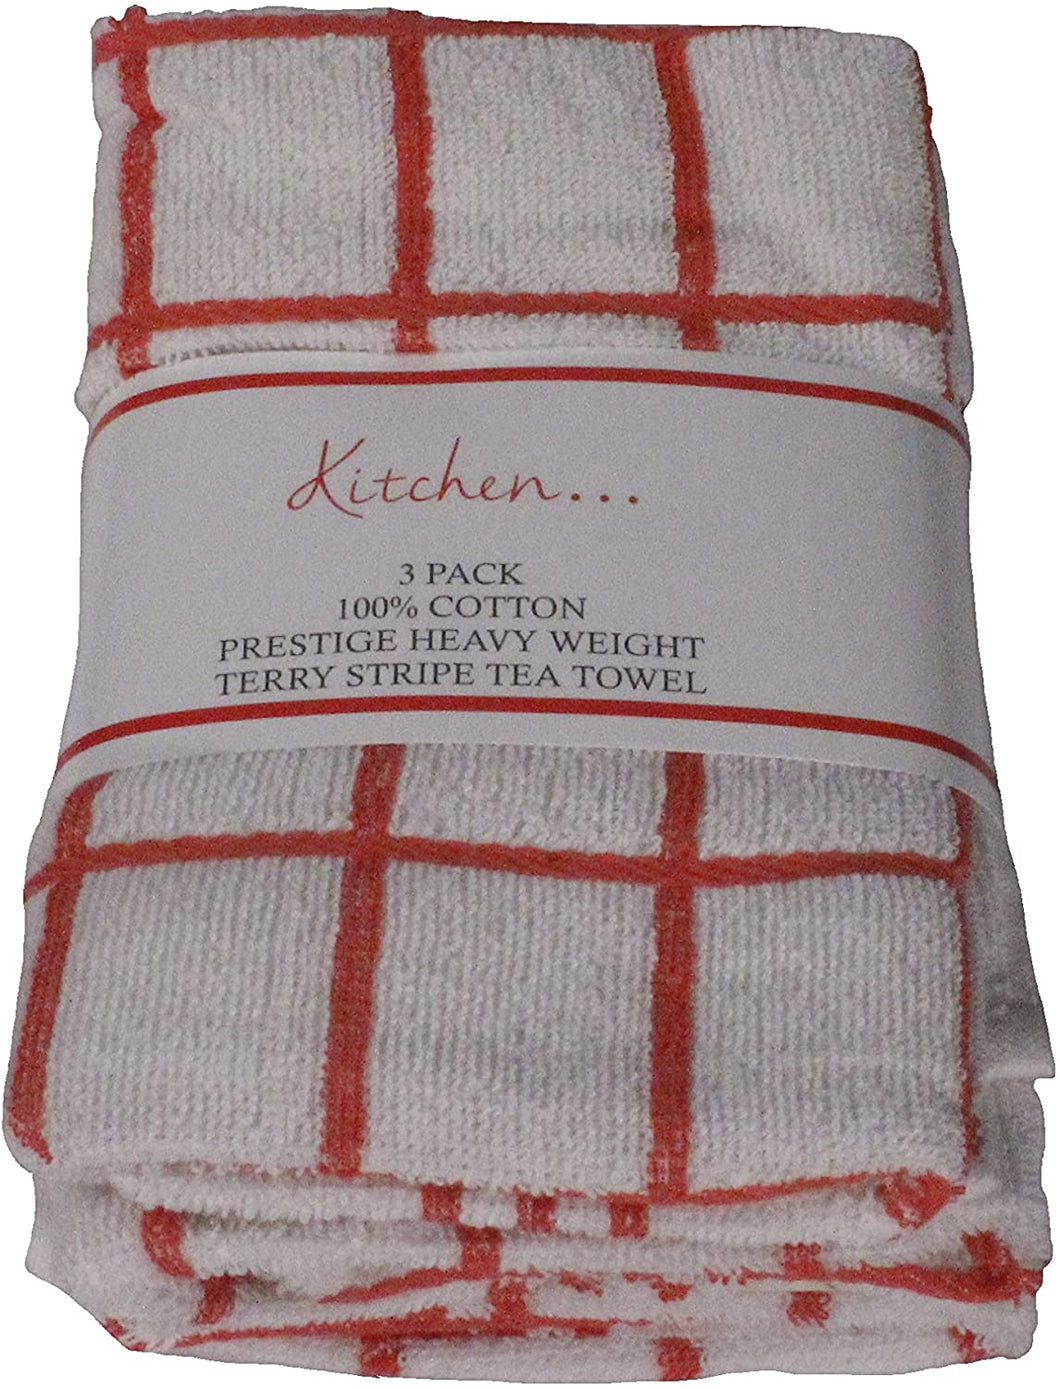 3 Pack 100% Cotton Red White Check Tea Towels